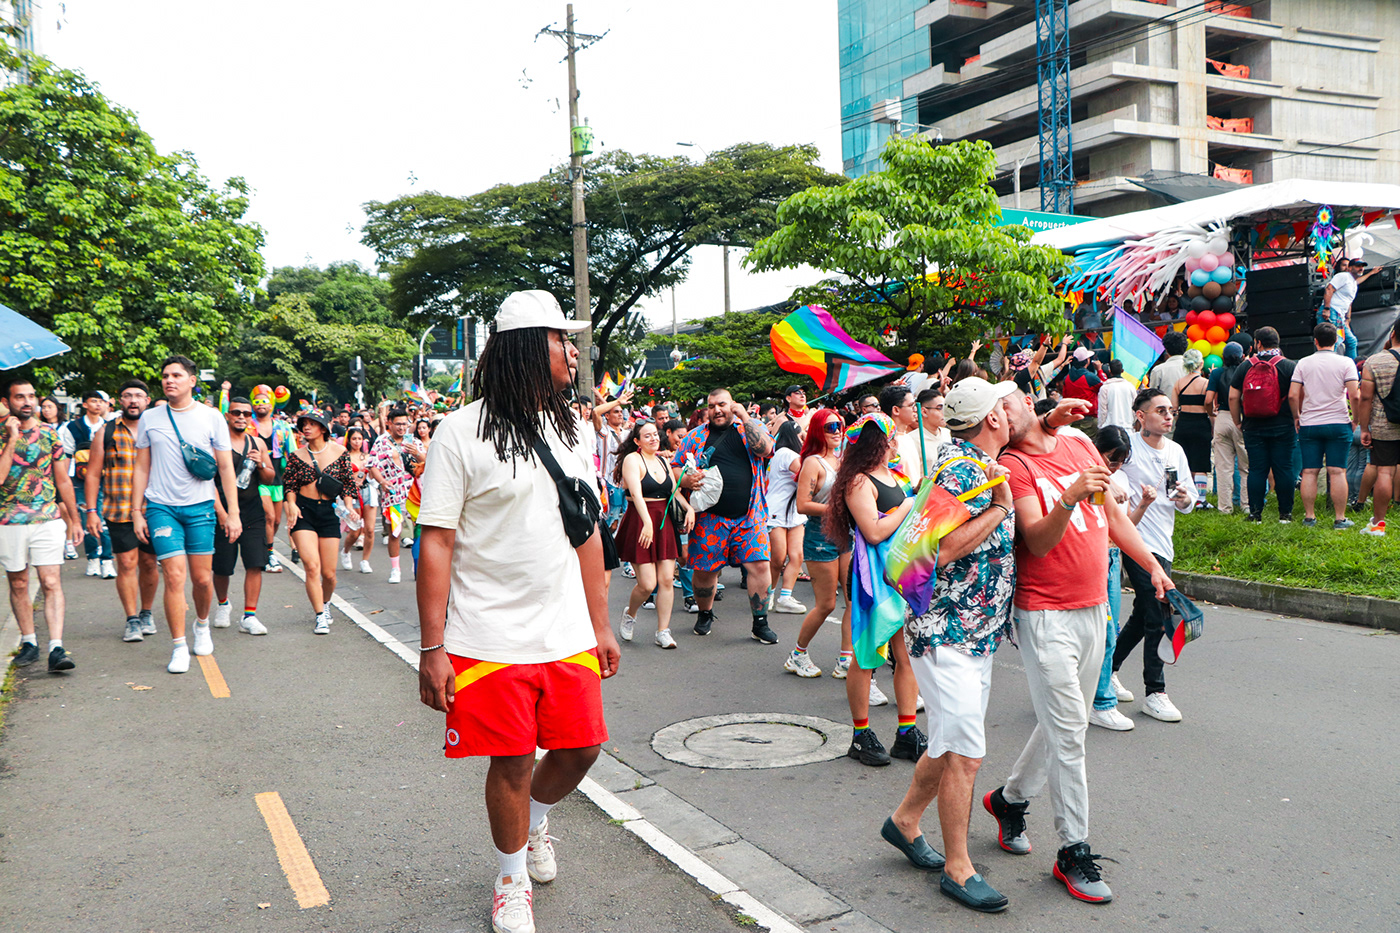 pride medellin pridemonth summer Events event photography Love loveislove LatinAmerica colombia LGBT Global parade queer transgender gay lesbian rainbow june lgbtpride storytelling   Photography  photographer Street people Gender